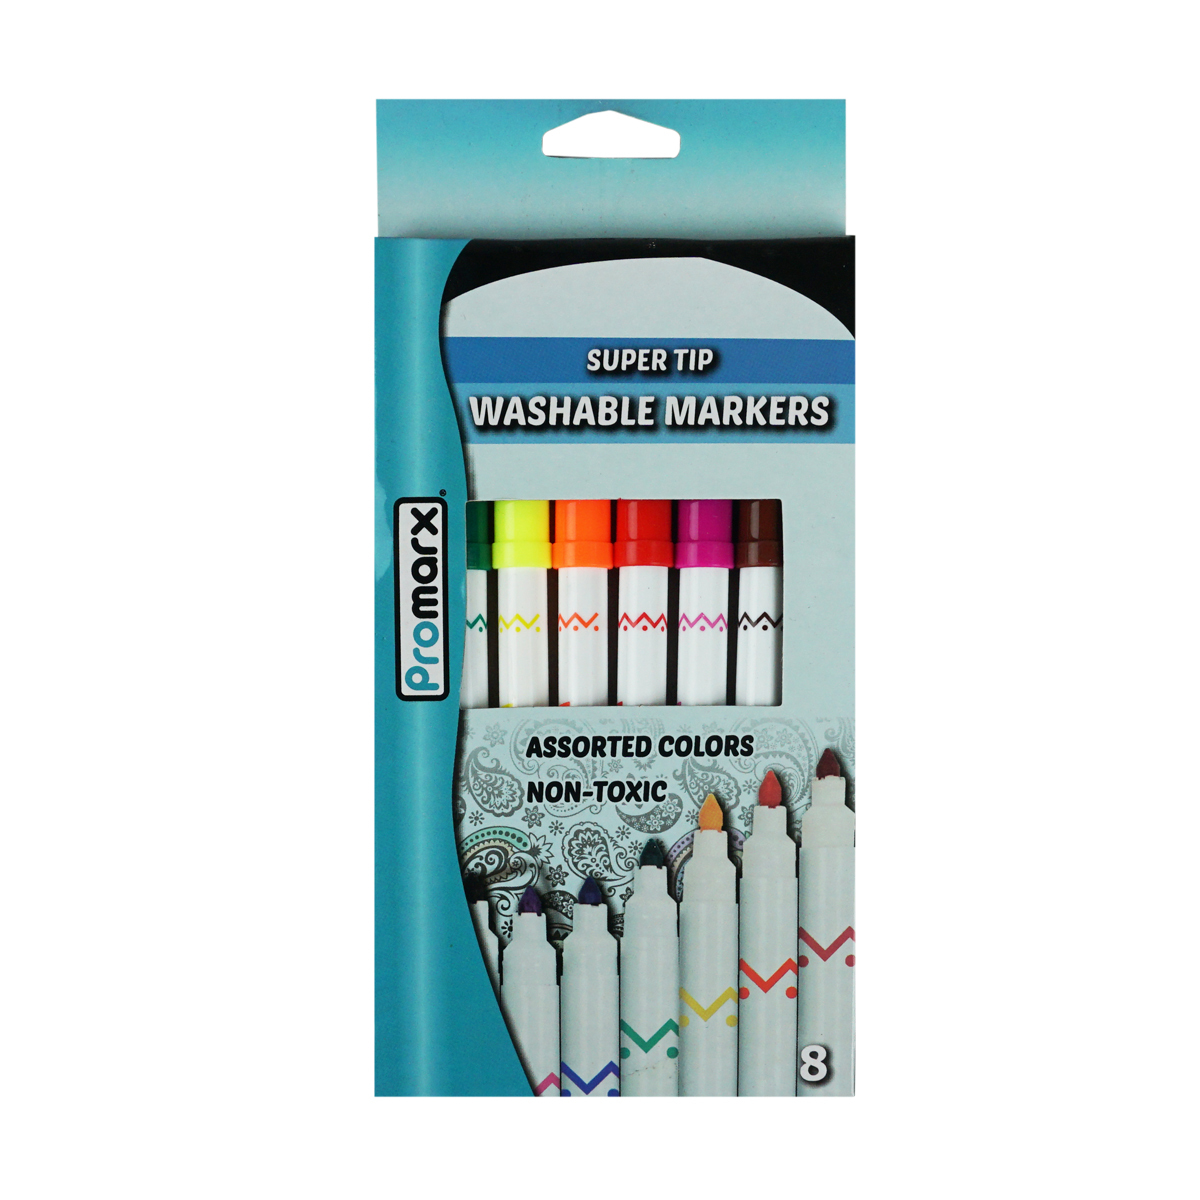 Washable Markers - Super Tip, 8 Count